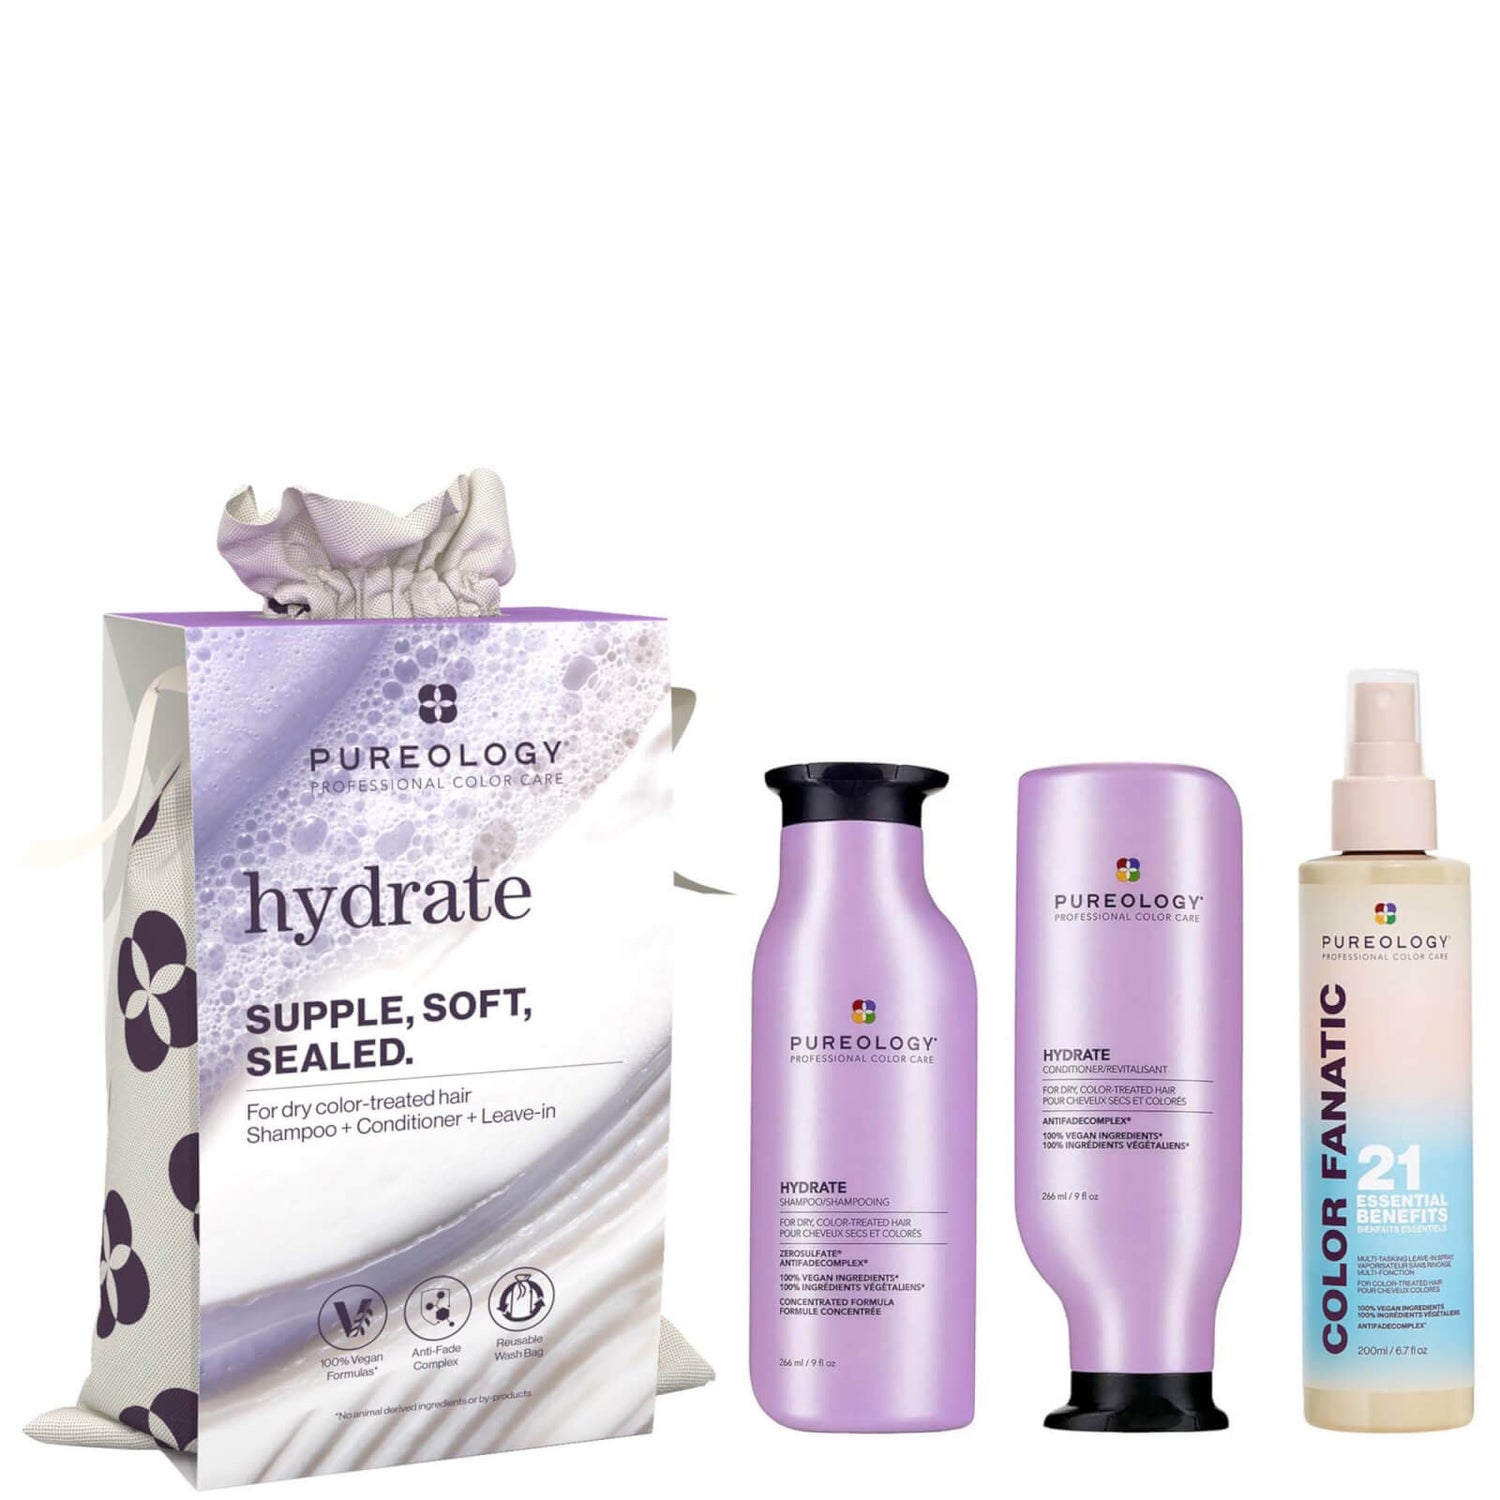 Pureology Hydrate Shampoo Conditioner and Color Fanatic Hair Gift Set ...